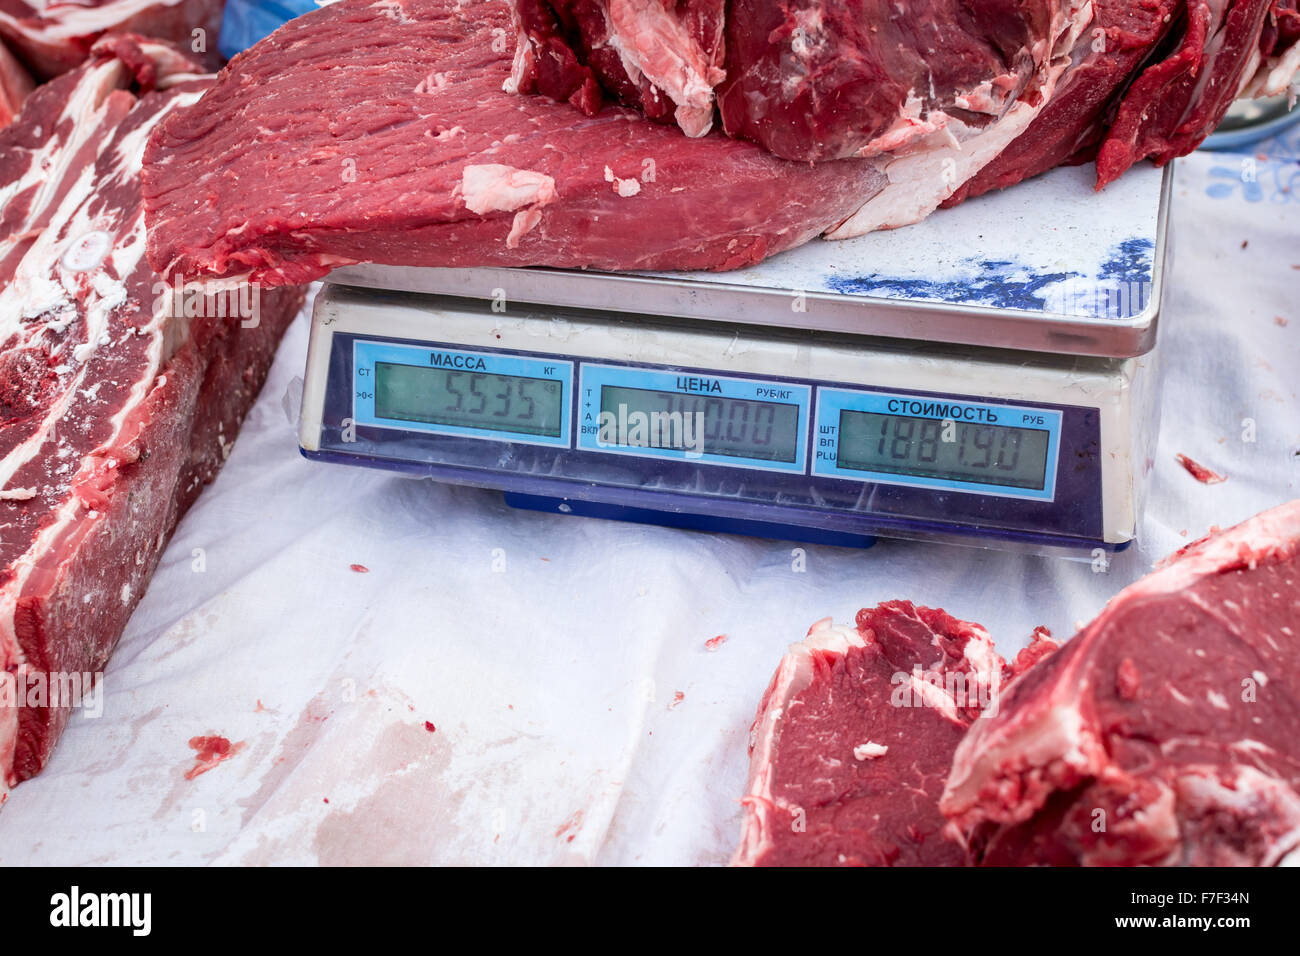 https://c8.alamy.com/comp/F7F34N/chunks-of-fresh-beef-rest-on-top-of-a-market-scale-showing-the-weight-F7F34N.jpg